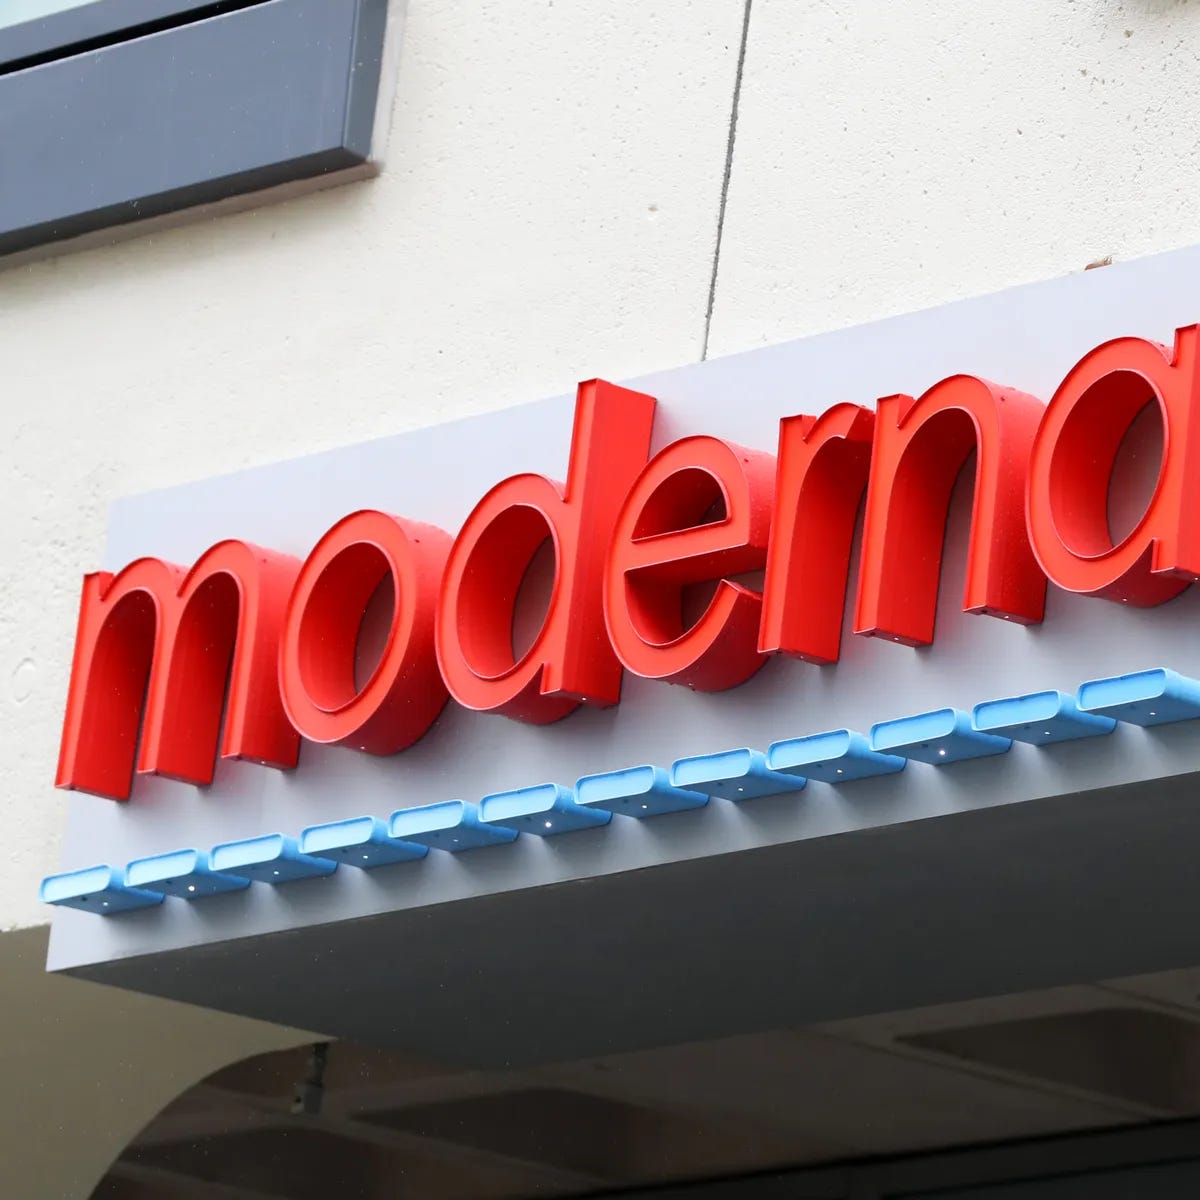 Moderna turns to AI to change how its employees work